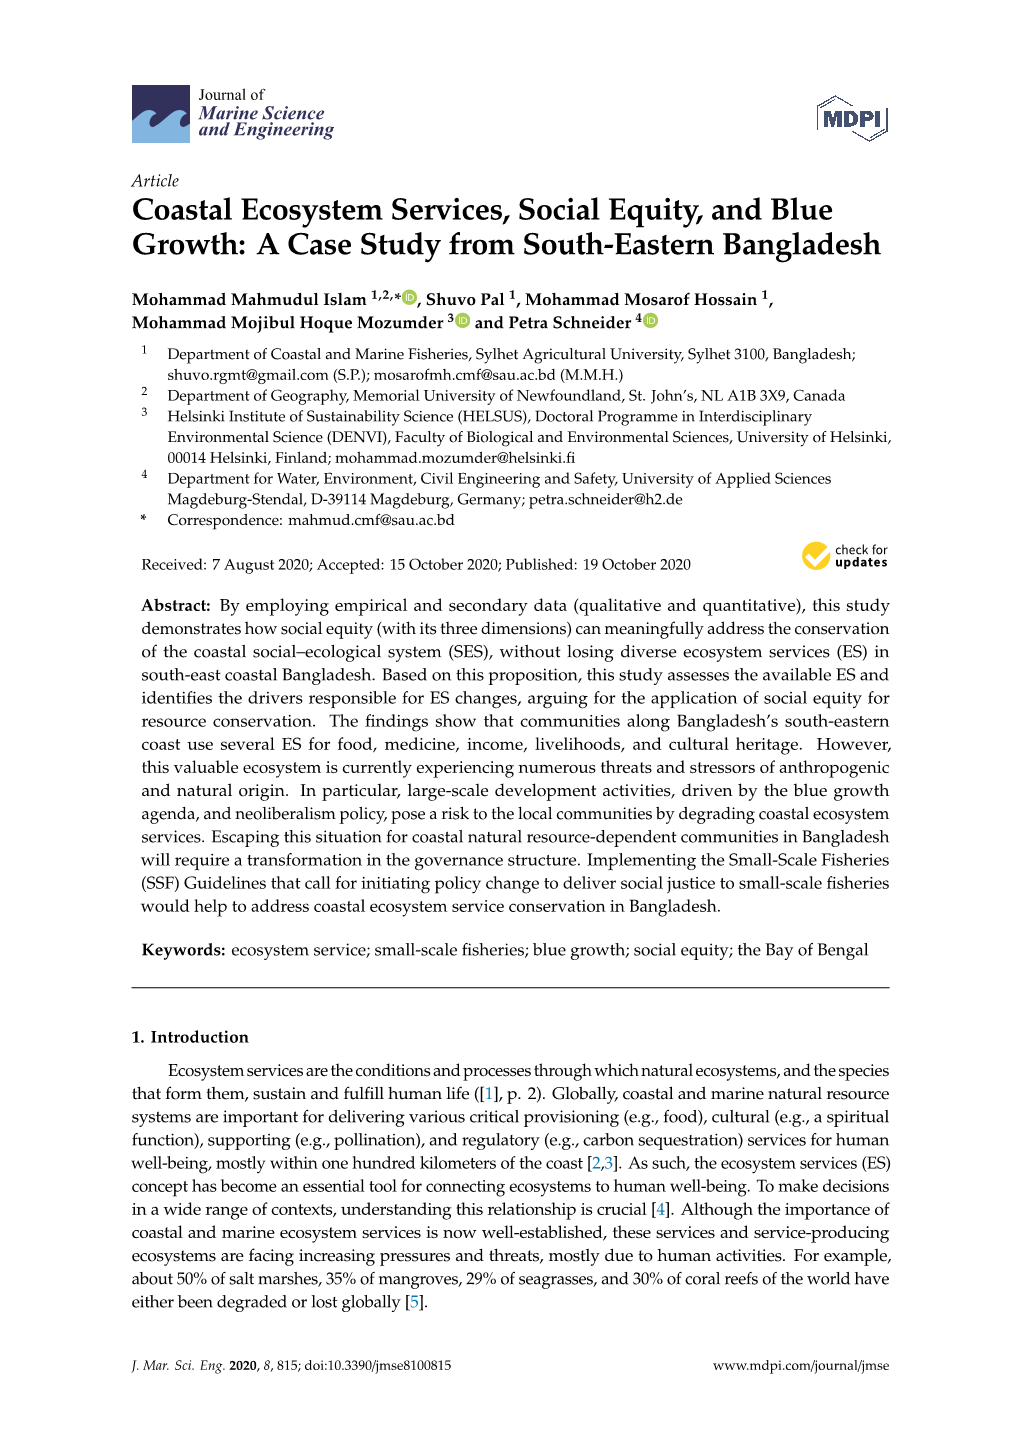 Coastal Ecosystem Services, Social Equity, and Blue Growth: a Case Study from South-Eastern Bangladesh